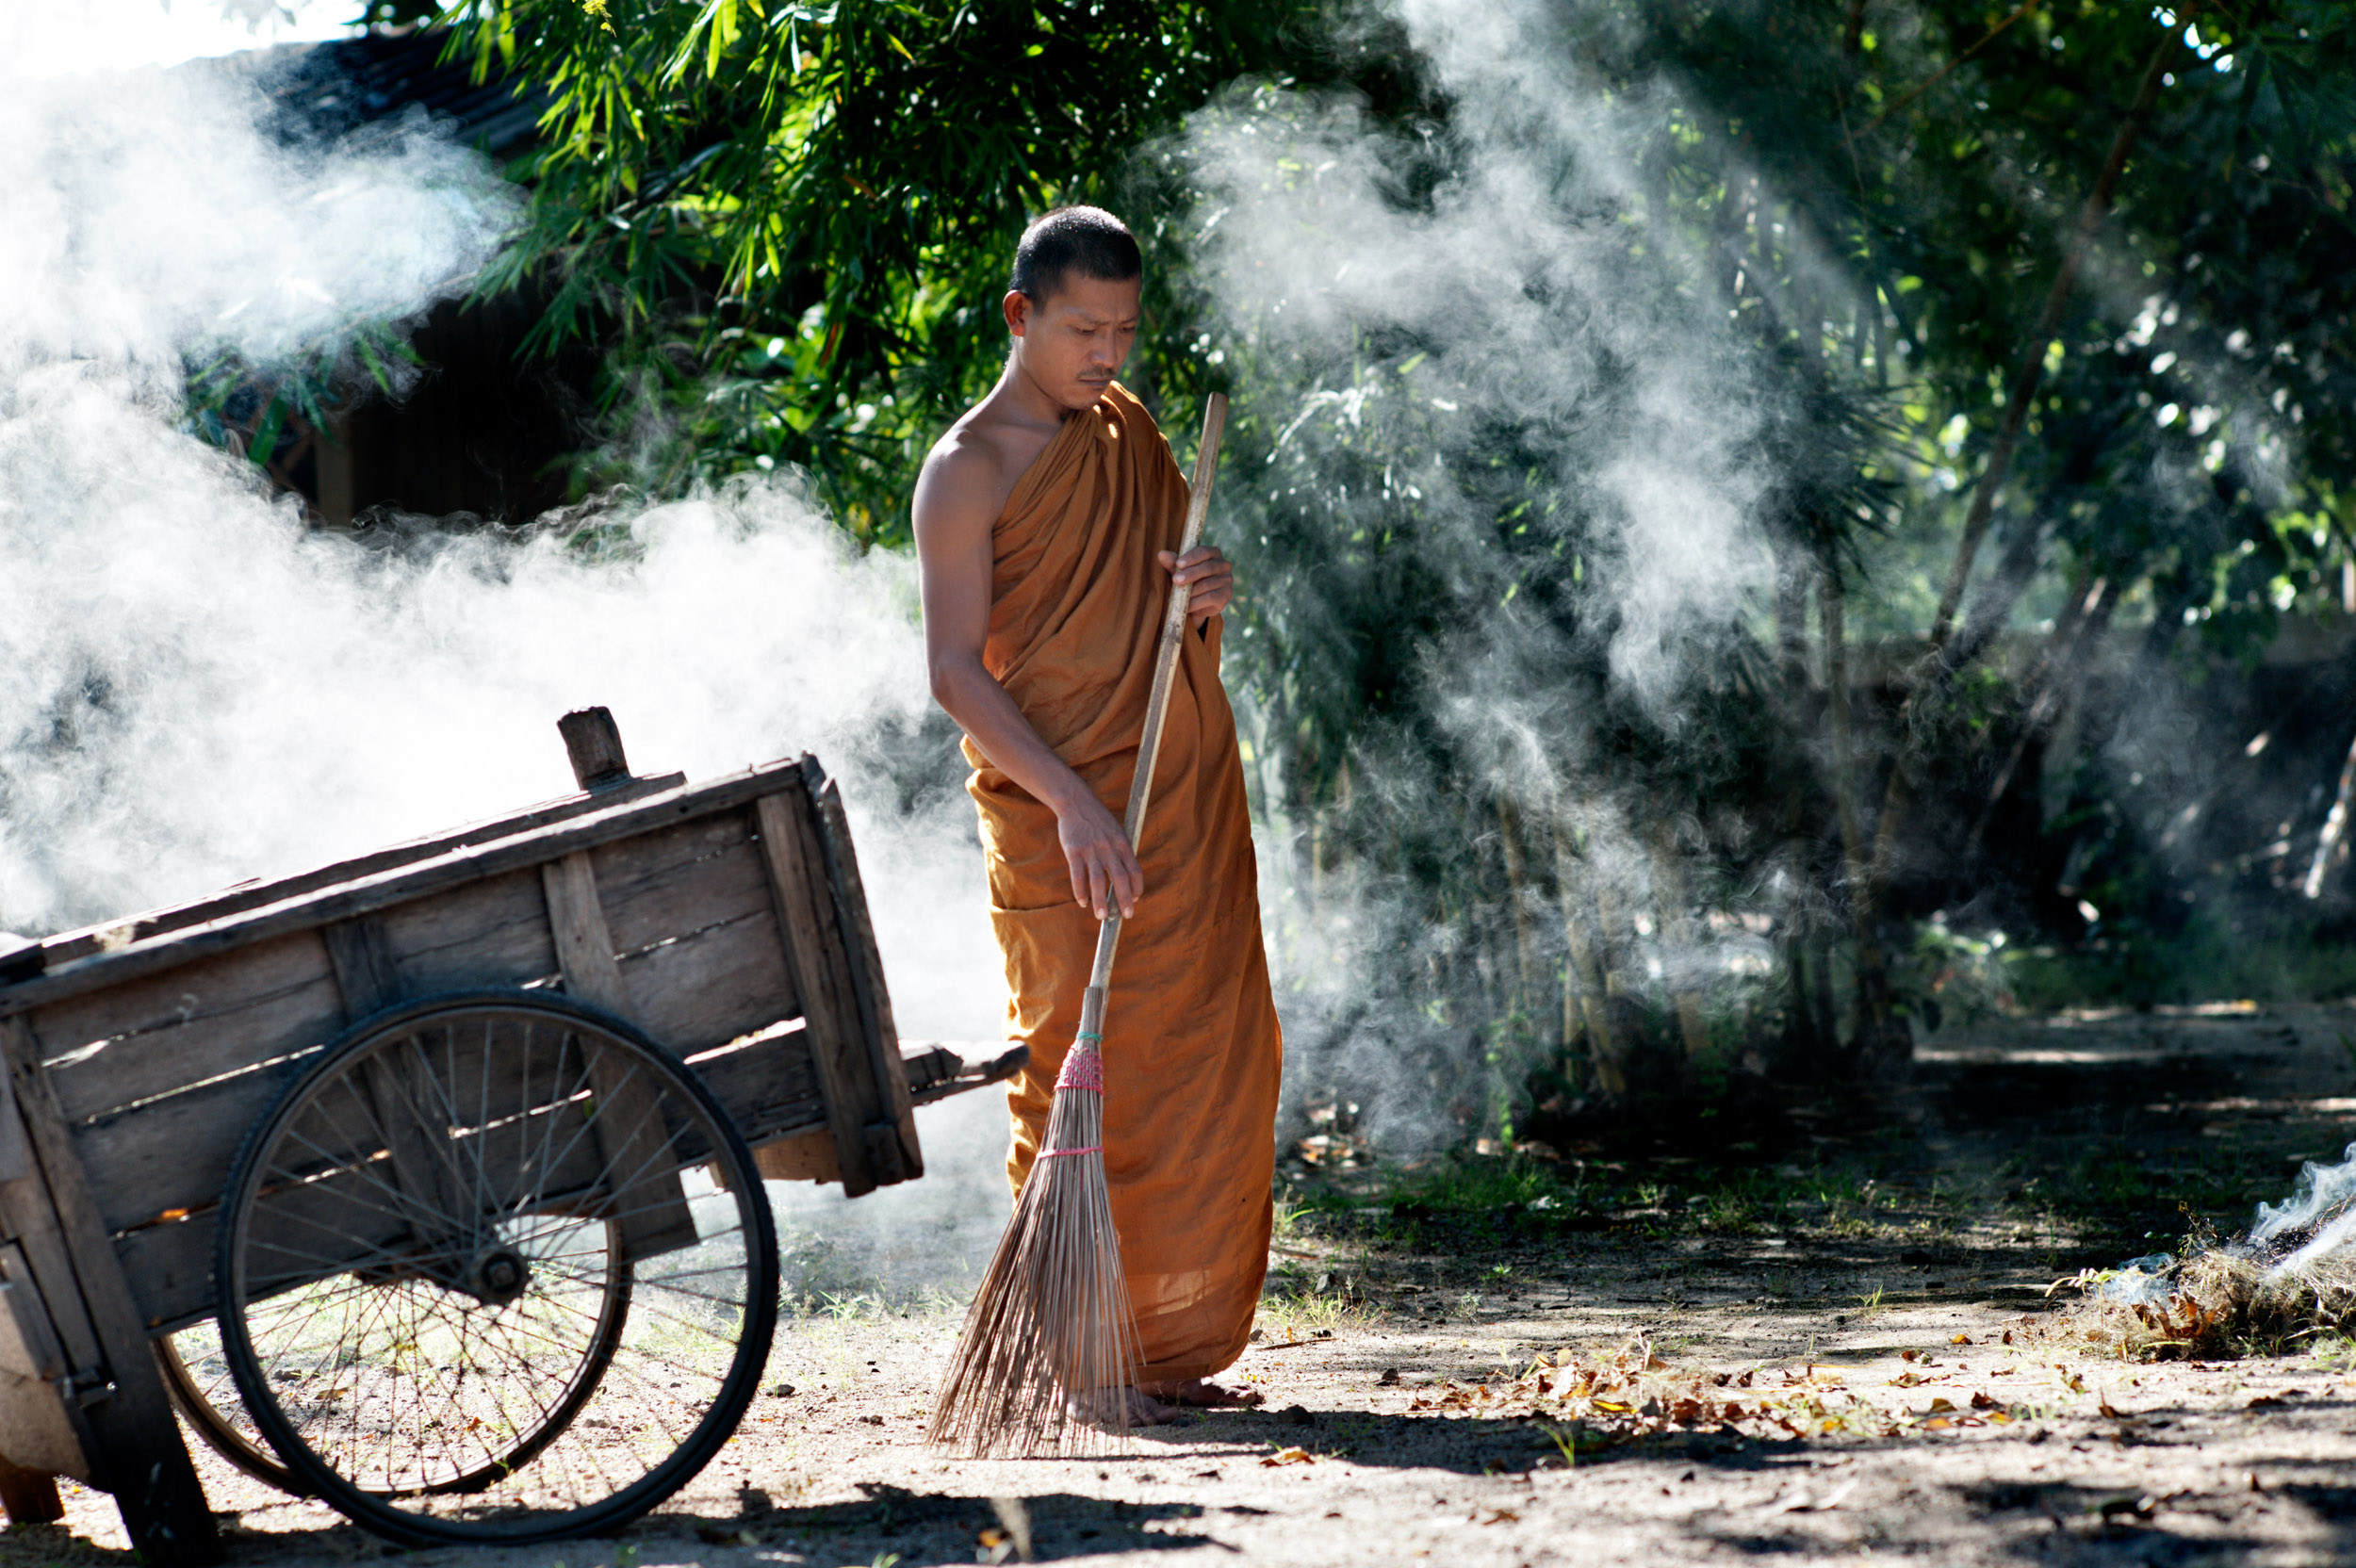 a monk sweeping leaves portrait photography idea